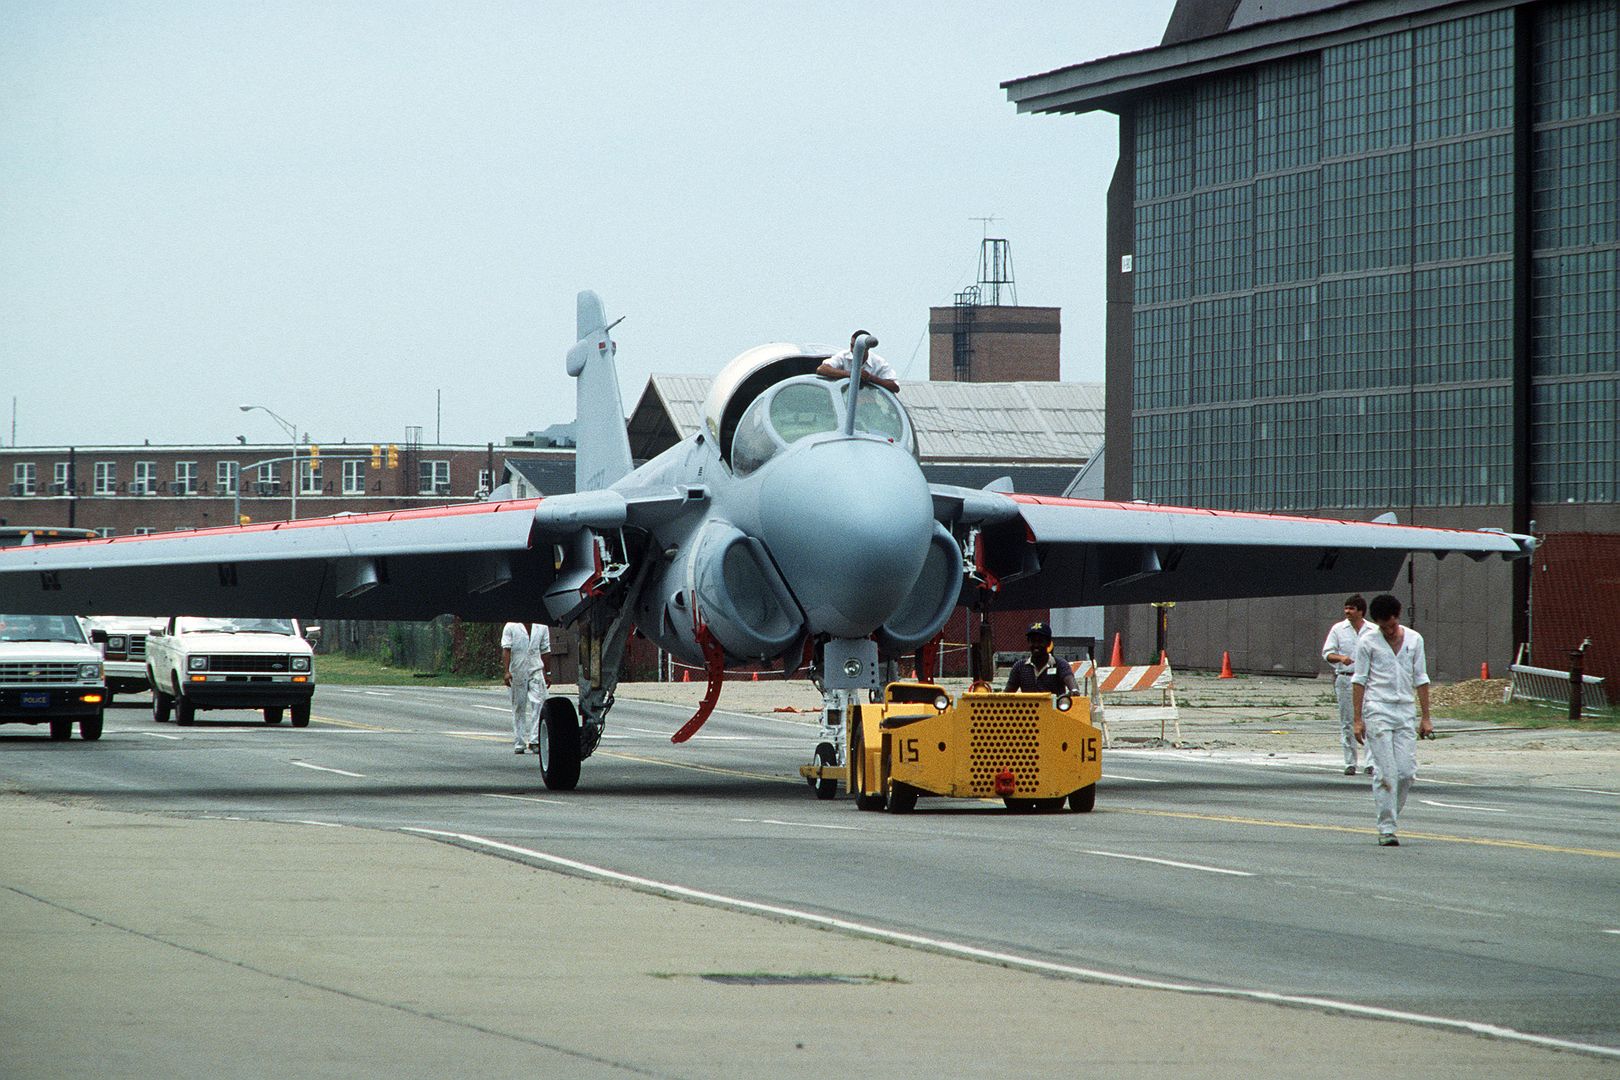 A Freshly Painted A 6 Intruder Aircraft Is Towed From A Paint Locker